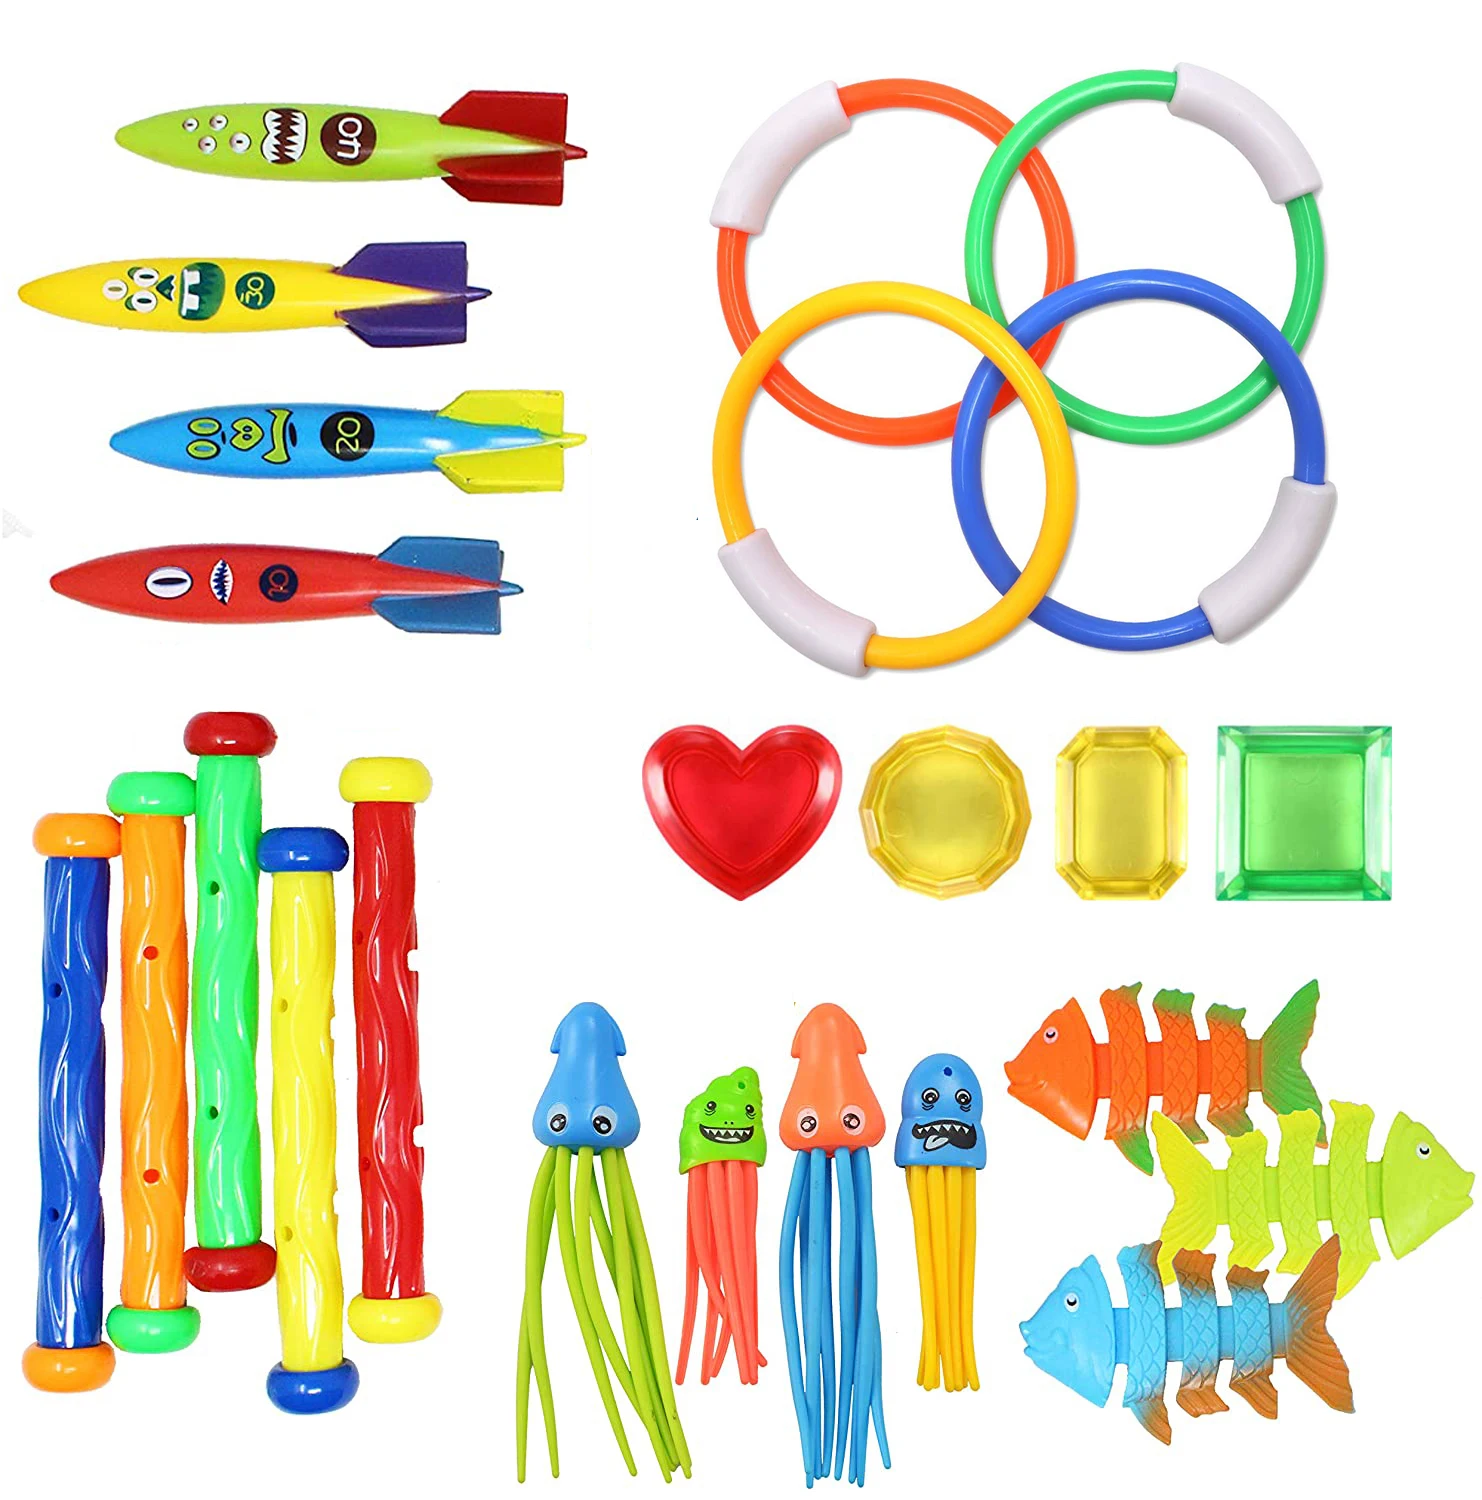 3 pcs Multicolor Diving Seaweed Toy Swimming Pool Diving Training Fun Diving Game Novelty Diving Grass Toys for Kids Jasnyfall Multicolor